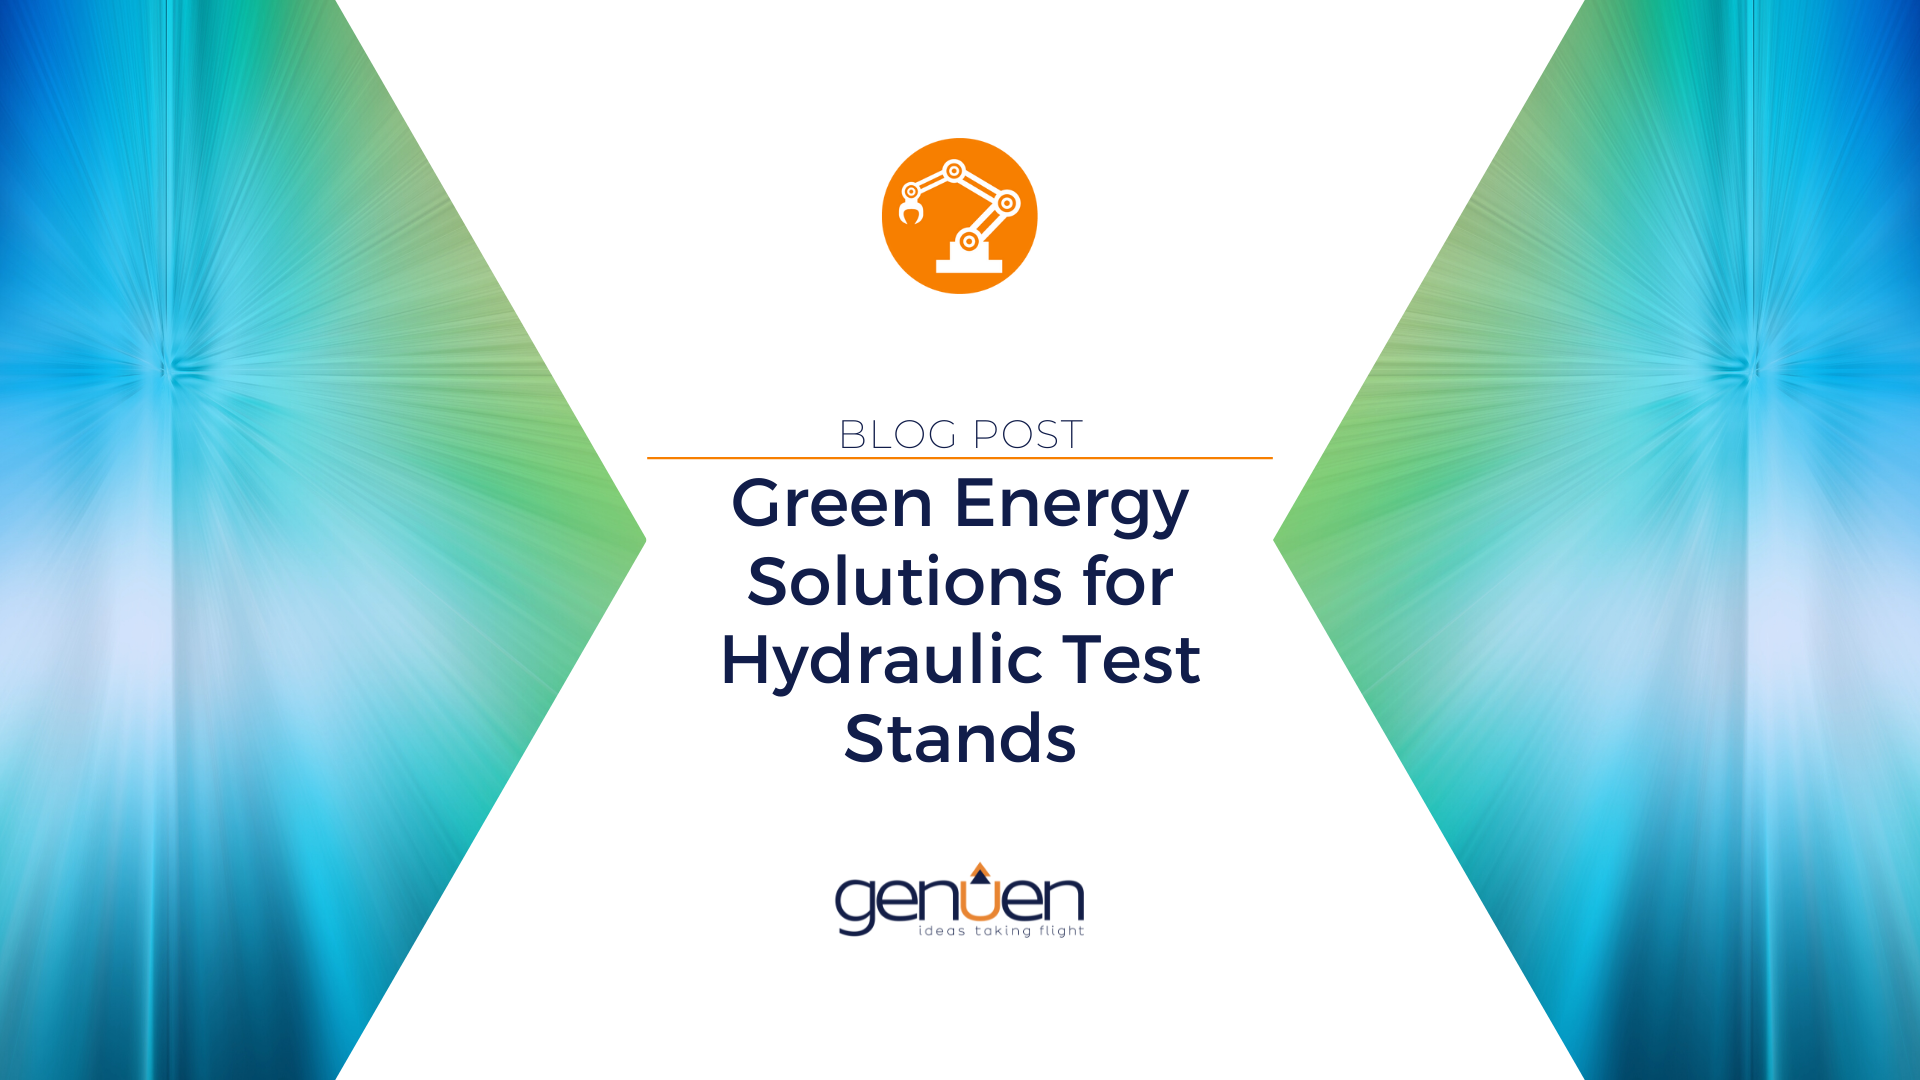 Green Energy Solutions for Hydraulic Test Stands